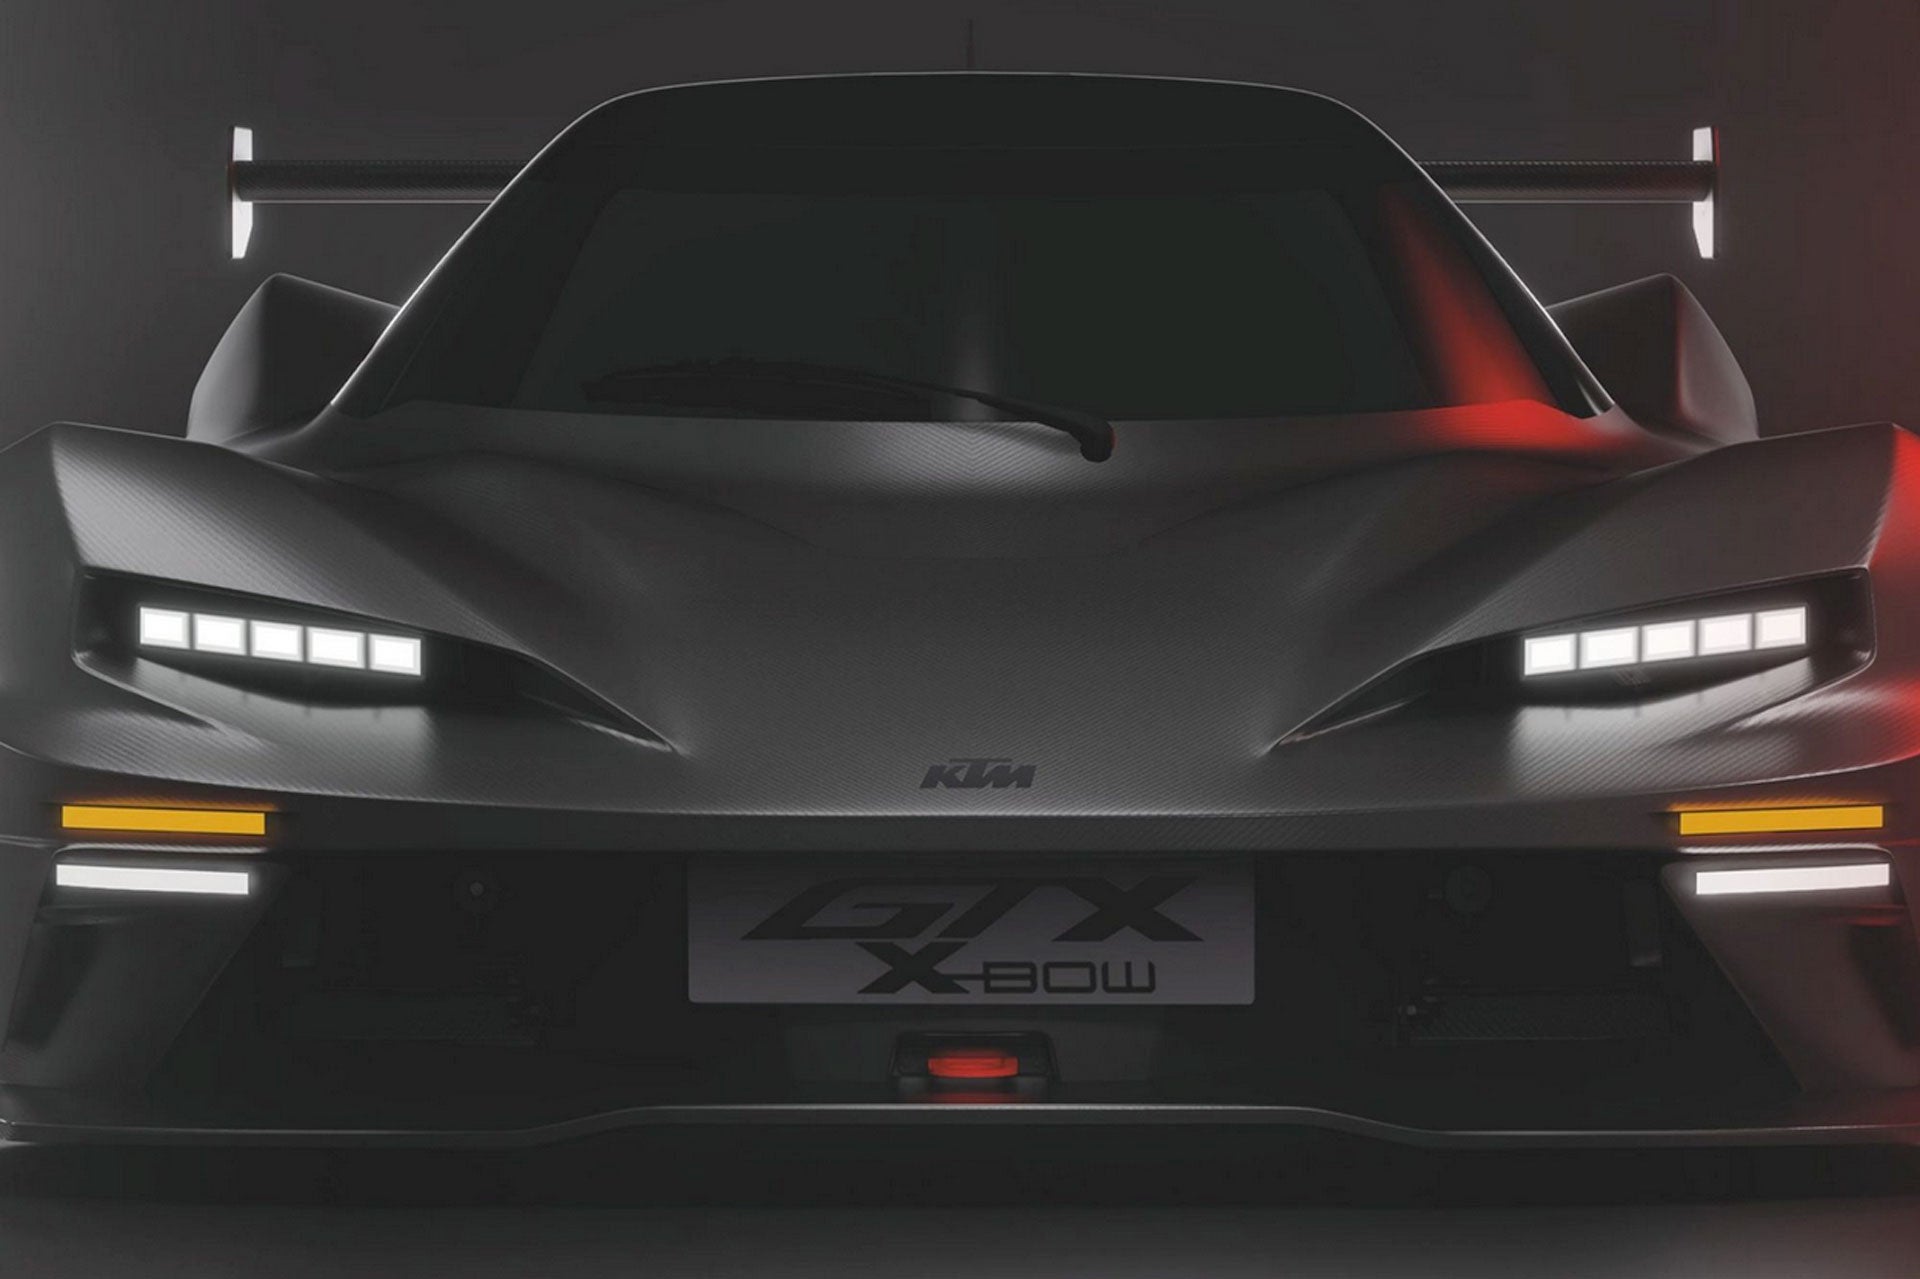 KTM X-Bow GTX \u0026 GT2 to be Launched This 